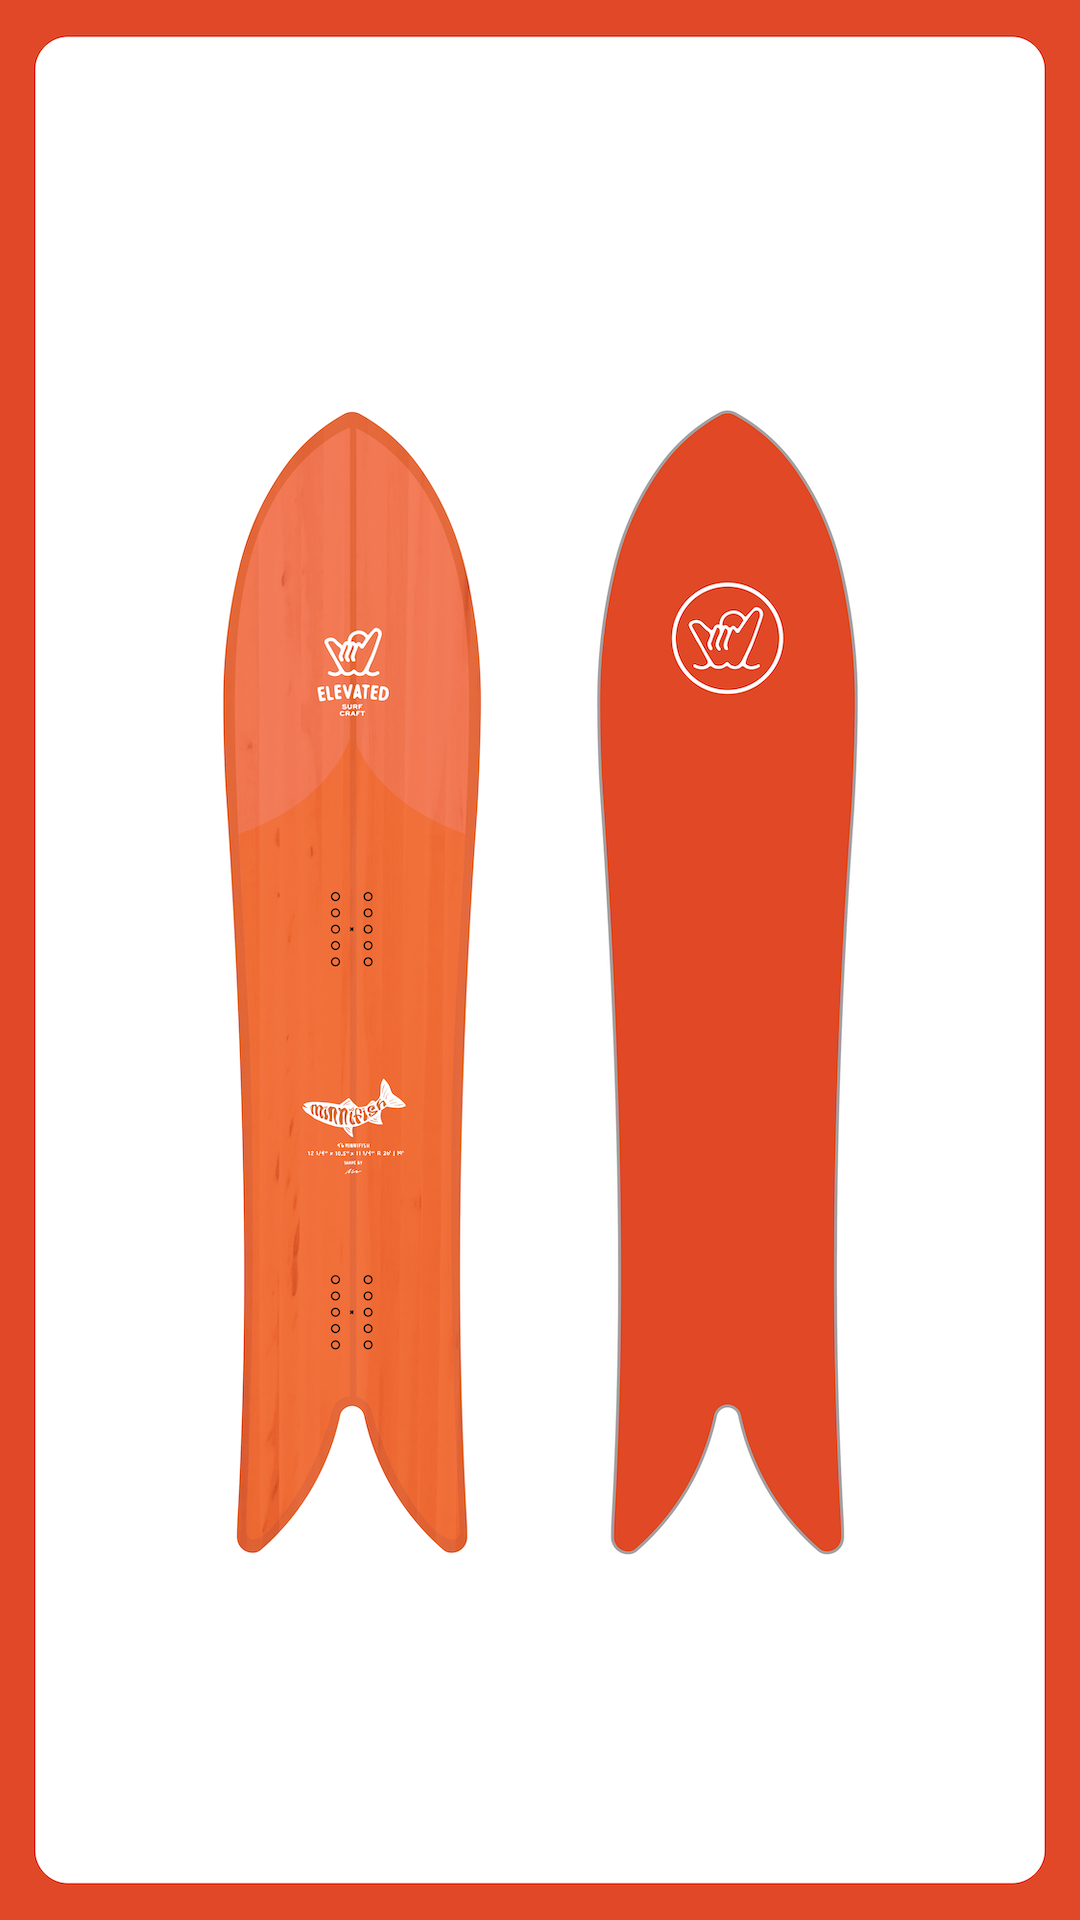 Fish Surf Board | Fish Snow Board | Elevated Surf Craft